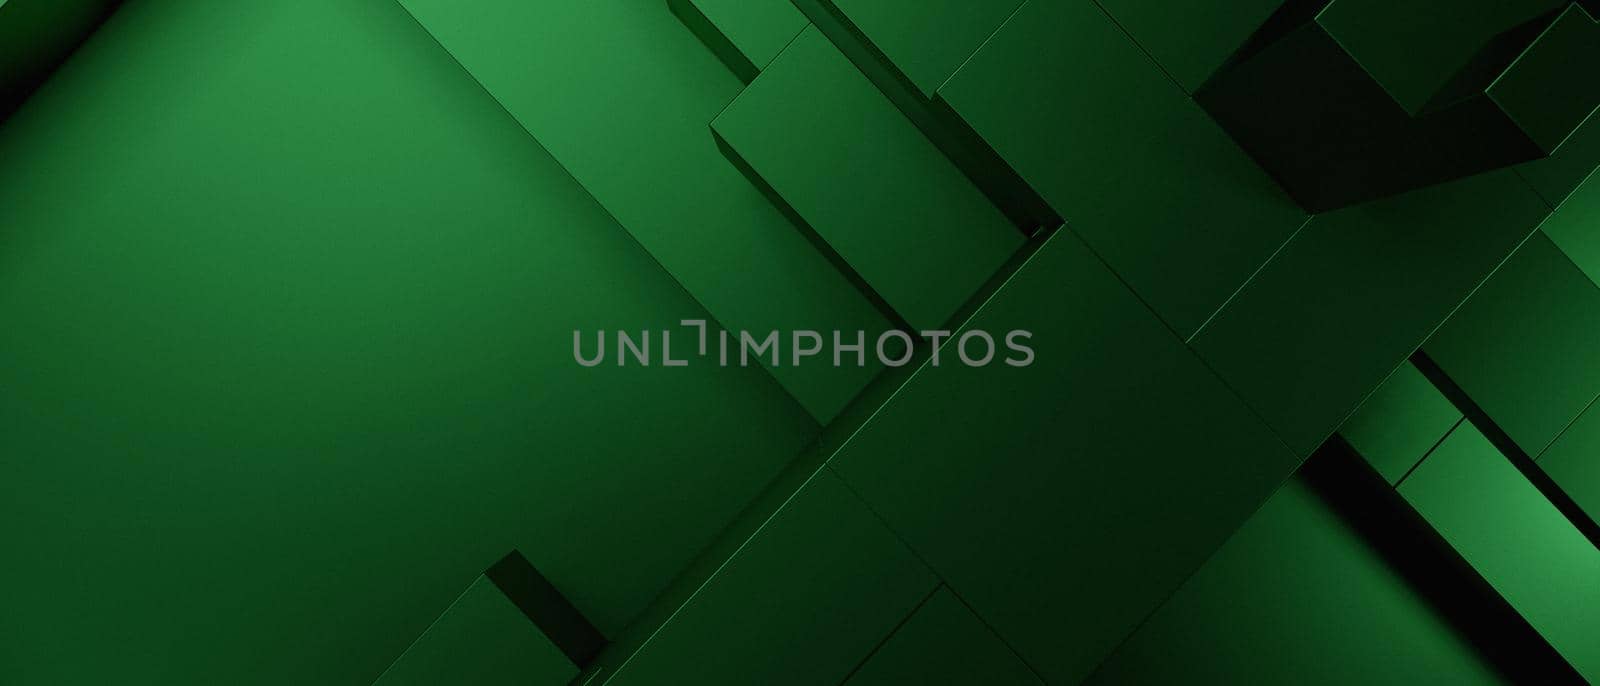 Abstract Luxurious Elegant Futuristic Block Cubes Three Dimensional Green Abstract Background 3D Render